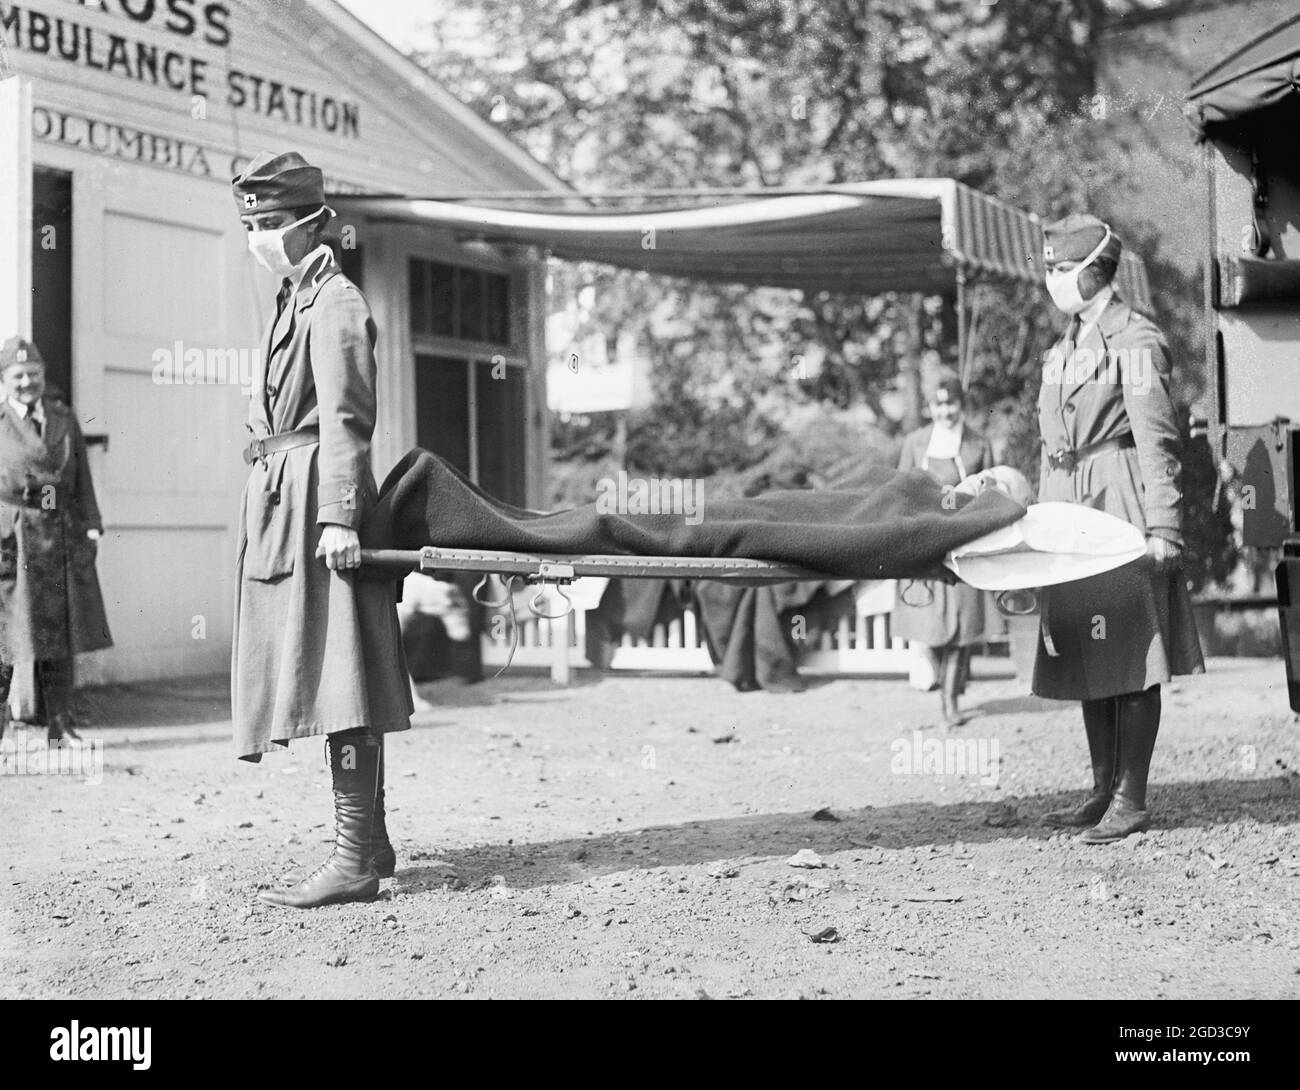 Demonstration at the Red Cross Emergency Ambulance Station in Washington, D.C., during the influenza pandemic of 1918 Stock Photo